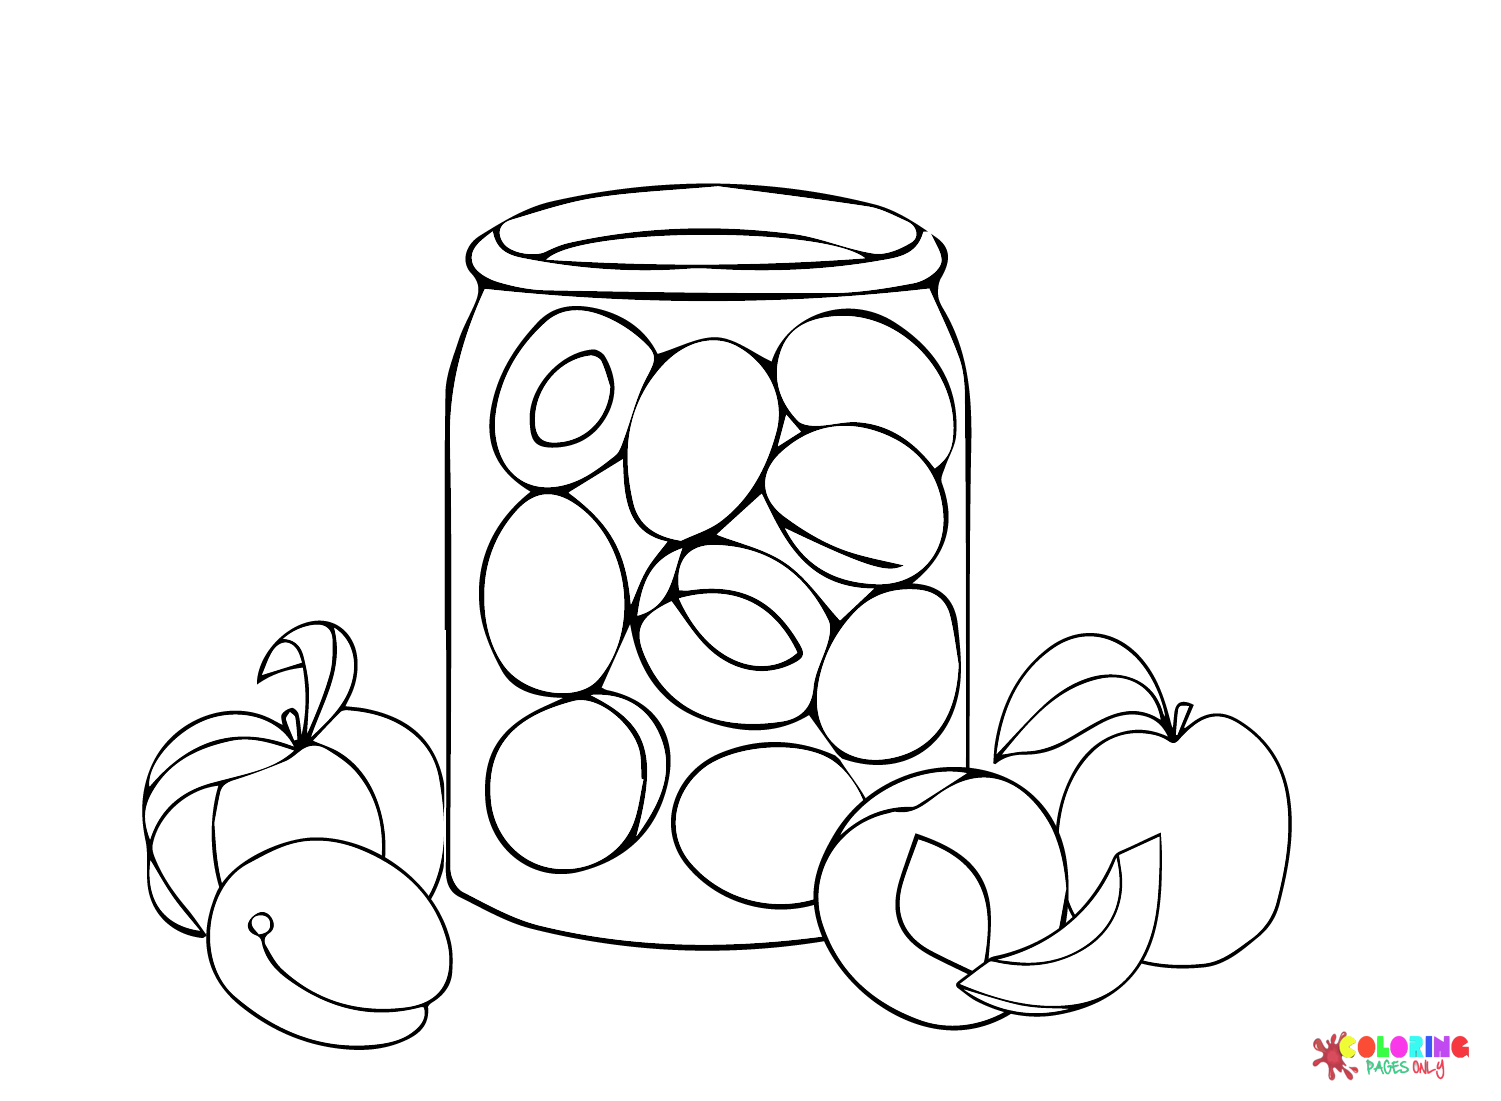 Drawing Apricot Coloring Page